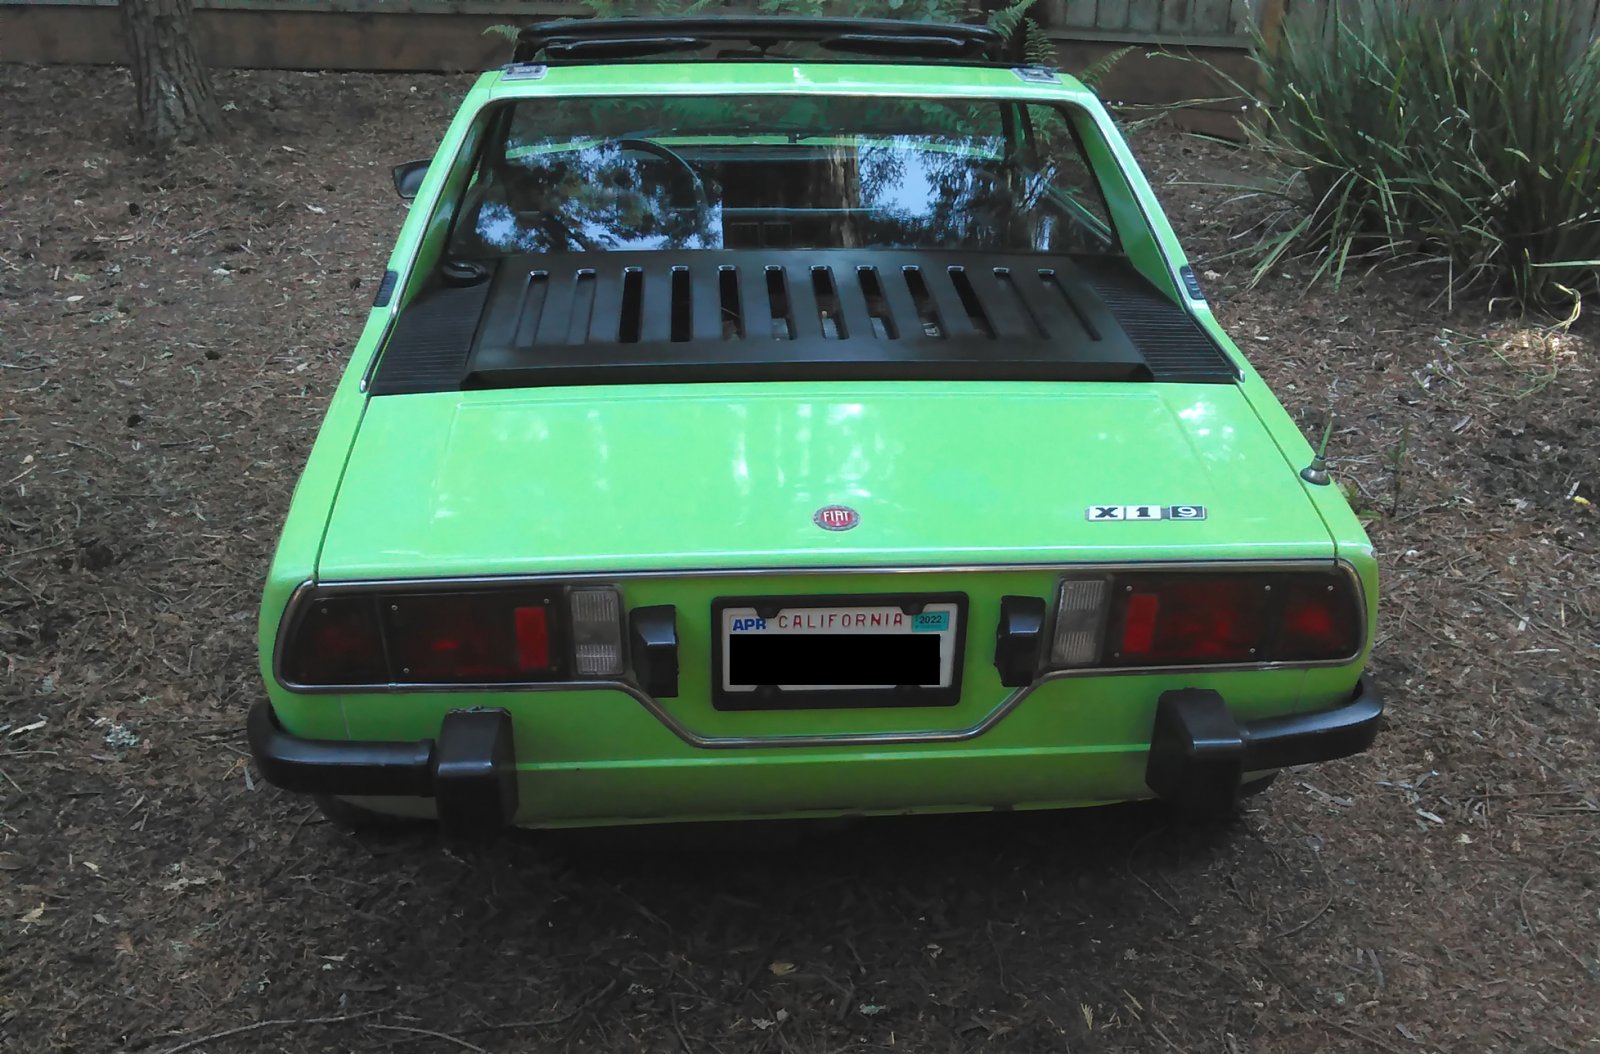 1974 Fiat X19 with Repainted Engine Cover - 2021_08_12R.jpg